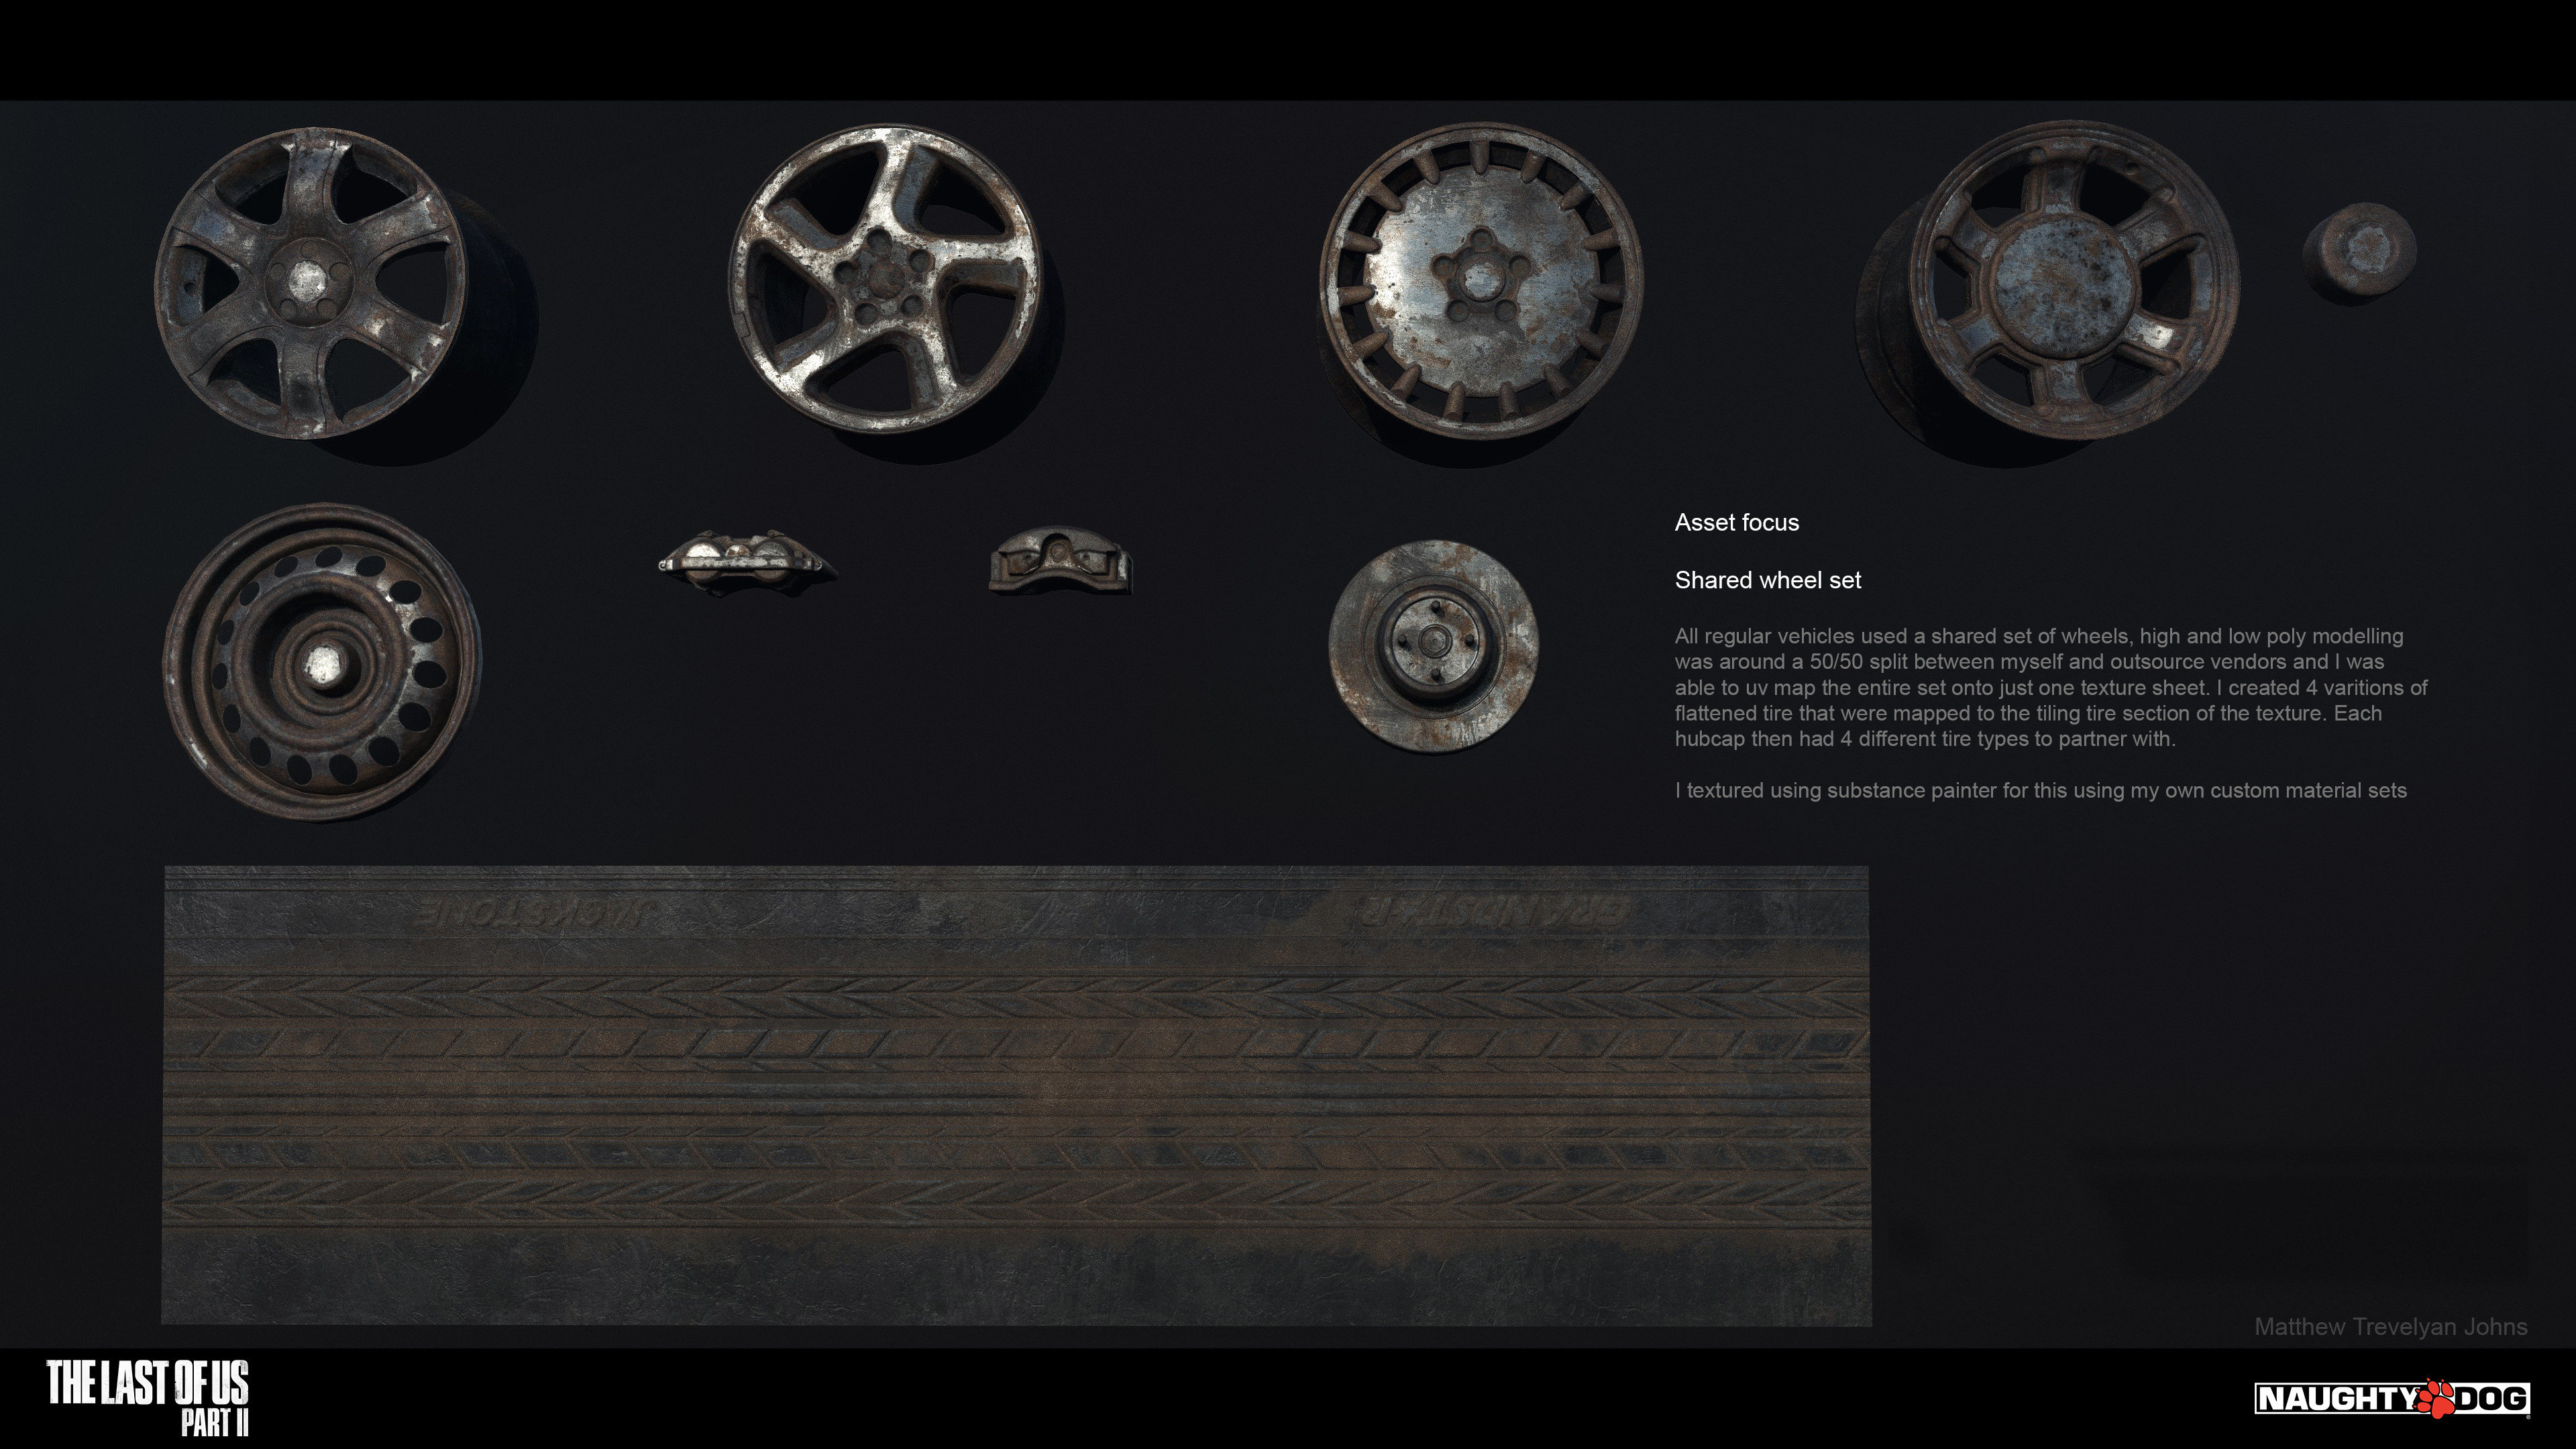 Here's a breakdown of how I built a shared set of wheels that were used by the majority of vehicles. Baking a 'tire-trim' was a really great way to create tires in this case, rather than baking from a more traditional high poly tire asset